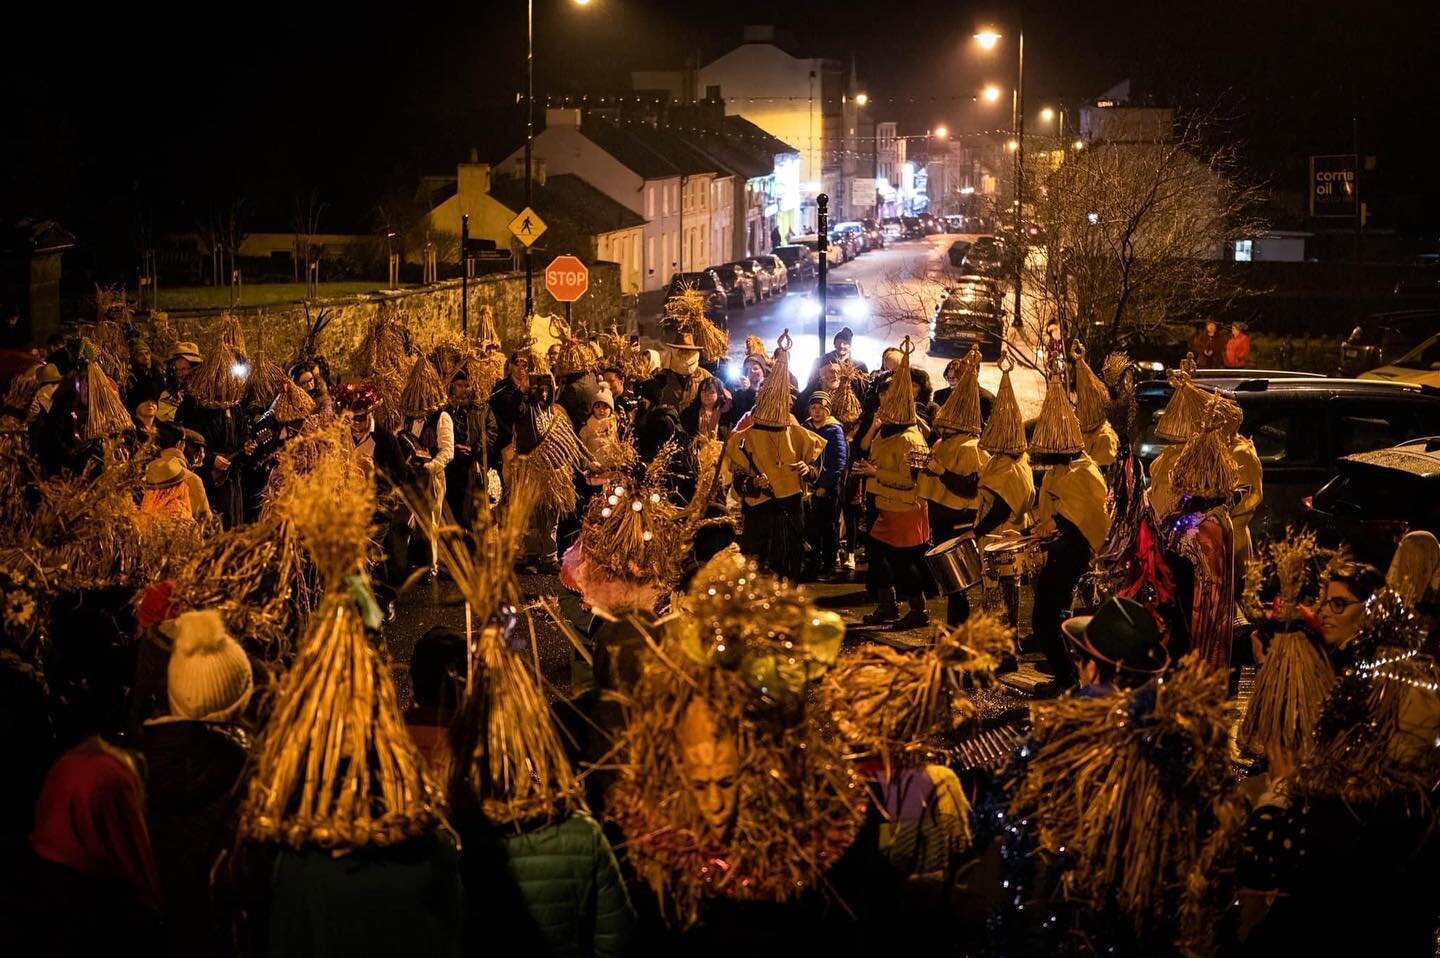 Sowing the Seed Project &amp; &Aacute;irc Damhsa Culture Club join forces tomorrow for 3 St. Patrick&rsquo;s Day parades. All welcome to dress in disguise and march with the mummers. 

Meeting at:
12.15pm CARRICK ON SHANNON Shannon Lodge

3.15pm MOHI